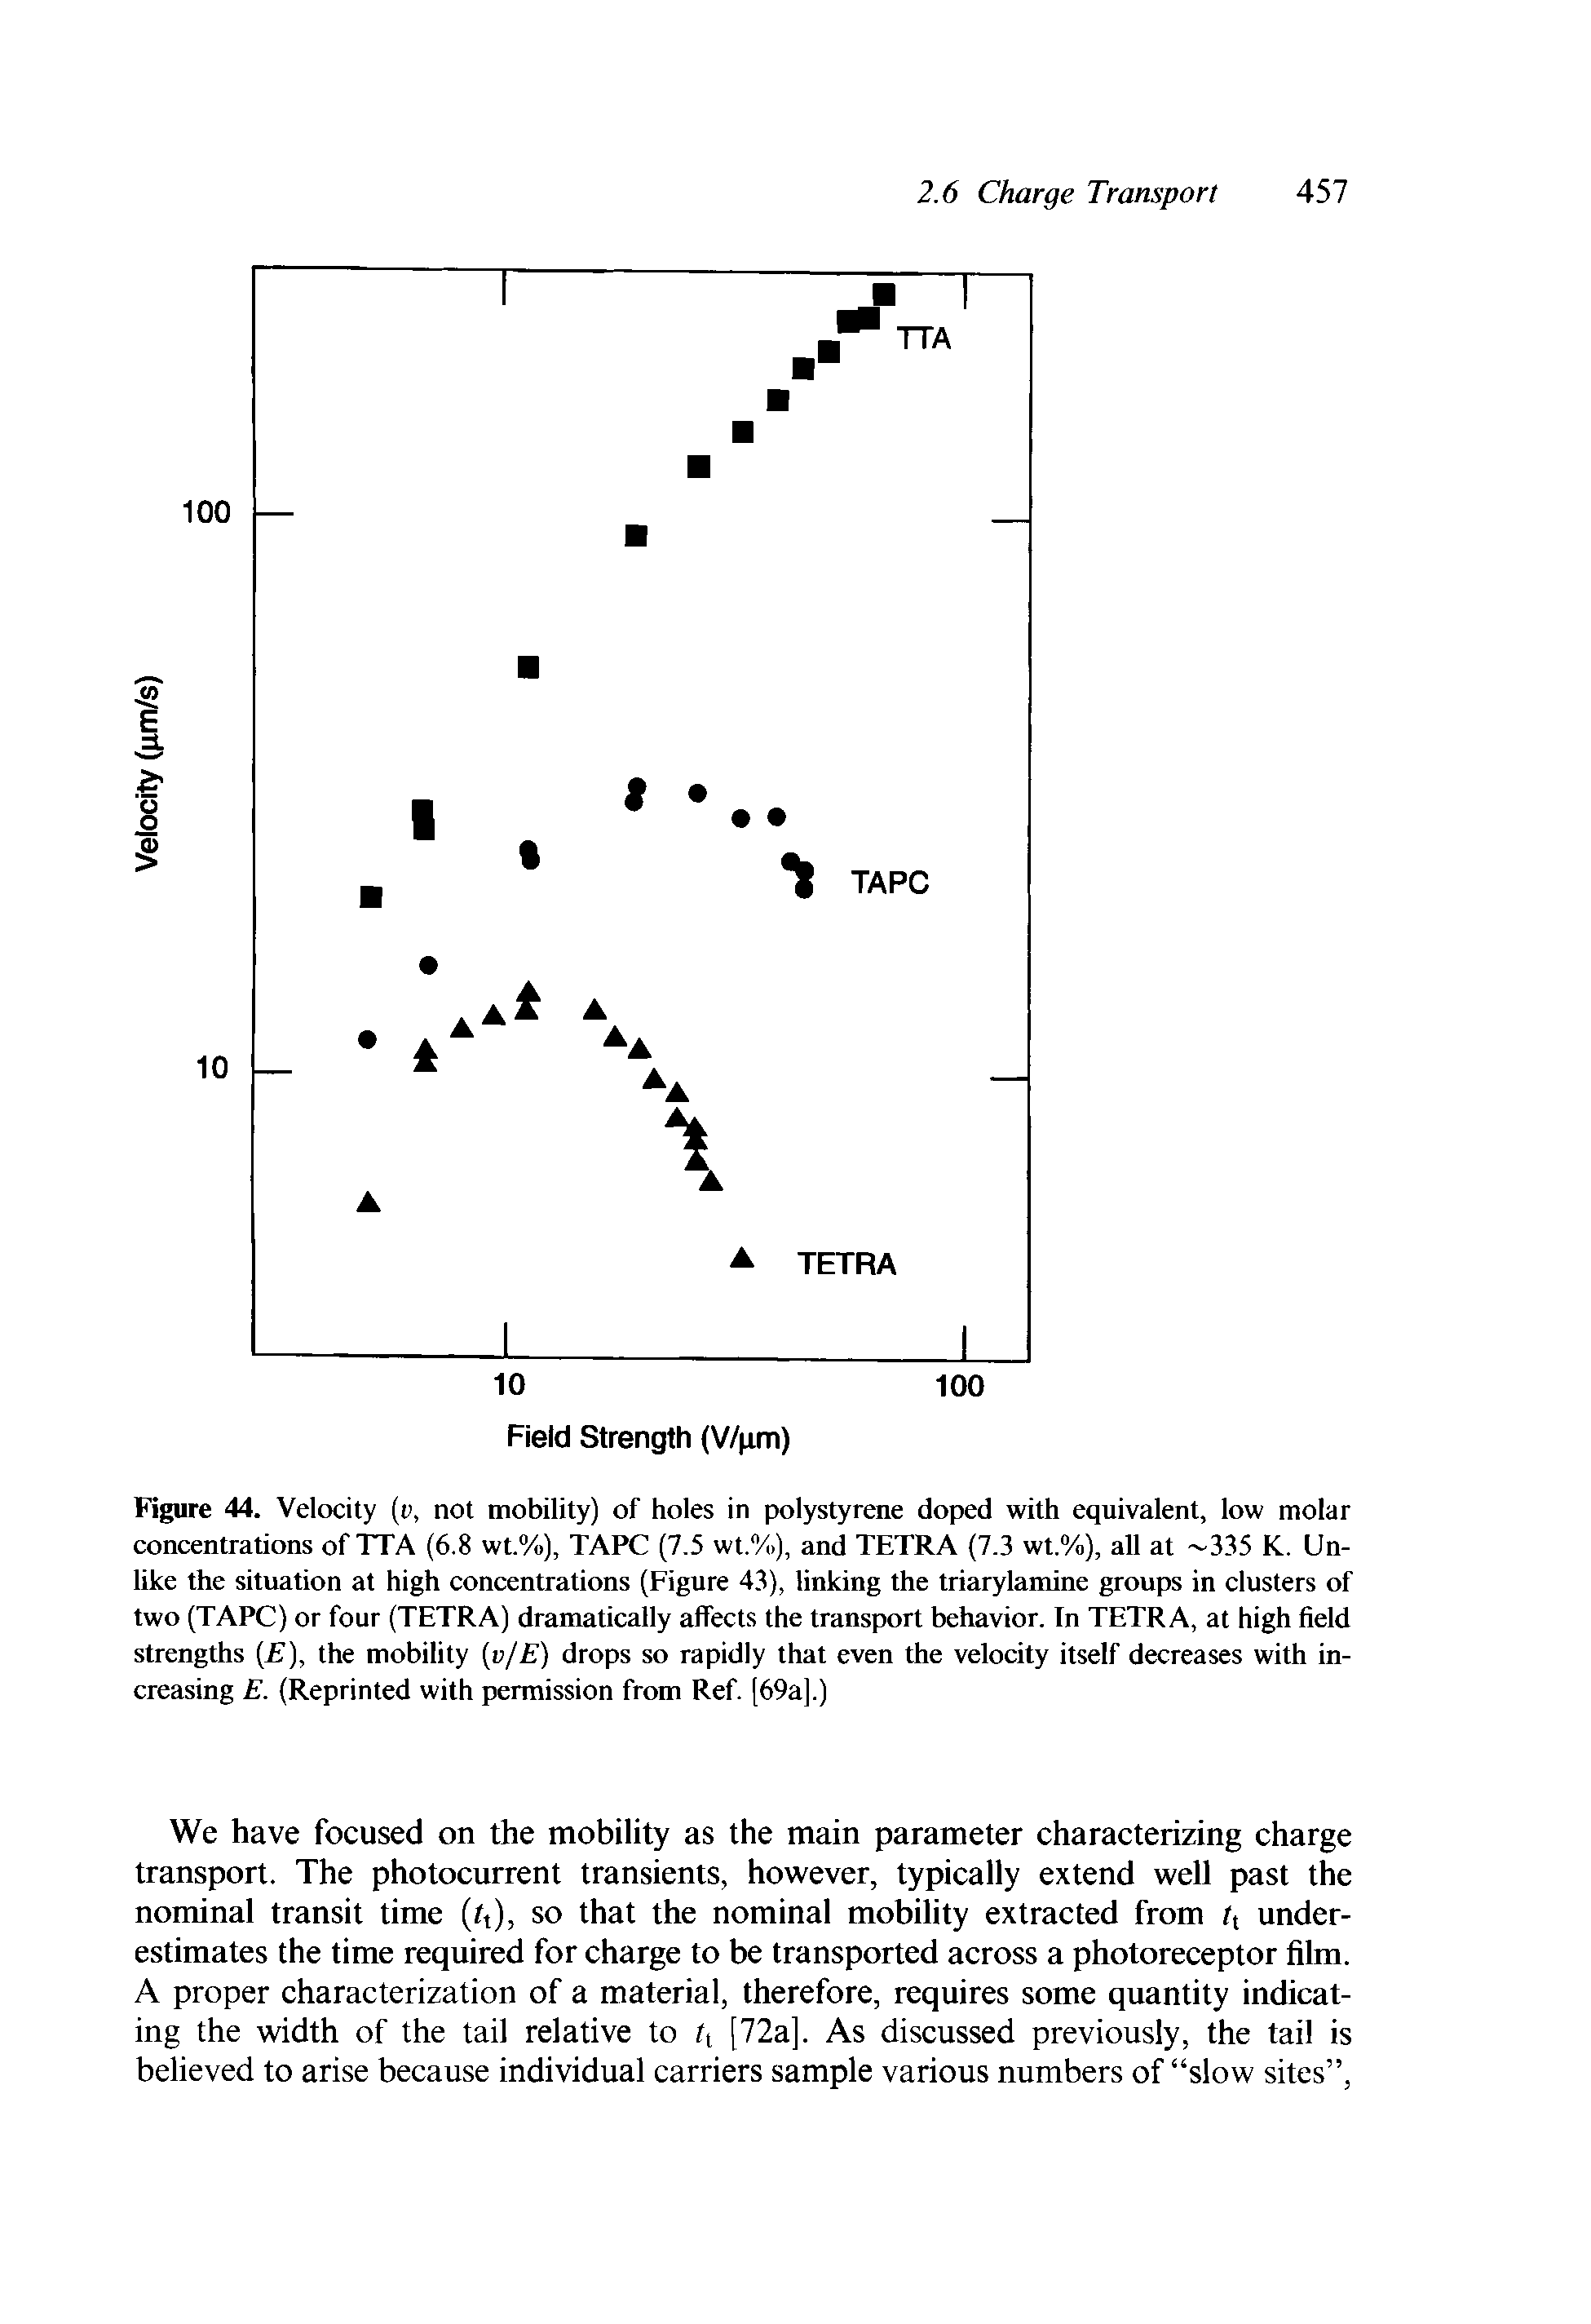 Figure 44. Velocity (o, not mobility) of holes in polystyrene doped with equivalent, low molar concentrations of TTA (6.8 wt.%), TAPC (7.5 wt."/)), and TETRA (7.3 wt.%), all at 335 K. Unlike the situation at high concentrations (Figure 43), linking the triarylamine groups in clusters of two (TAPC) or four (TETRA) dramatically affects the transport behavior. In TETRA, at high field strengths ), the mobility [v/E) drops so rapidly that even the velocity itself decreases with increasing E. (Reprinted with permission from Ref. [69a].)...